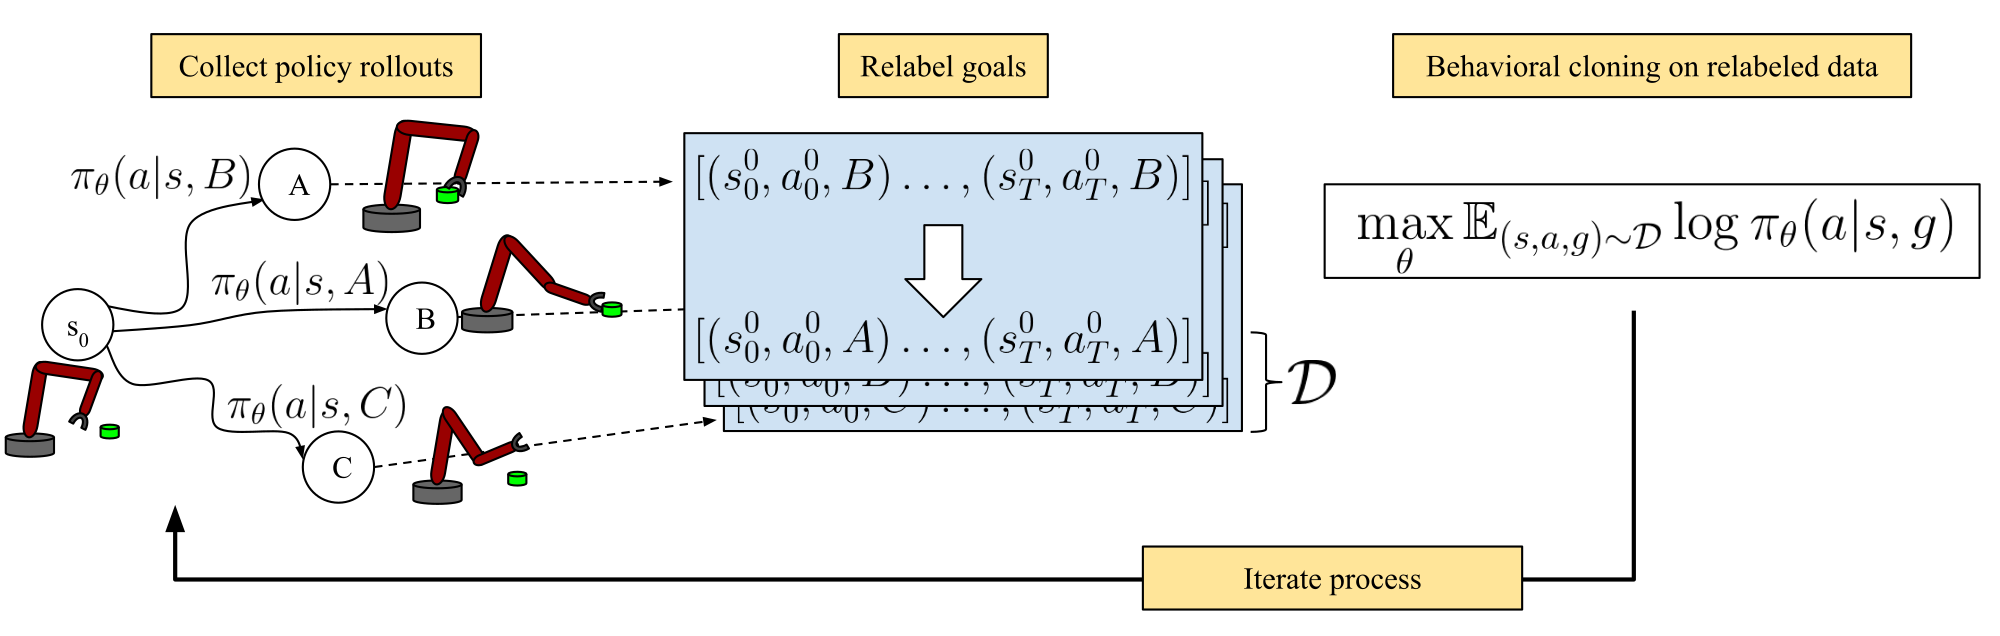 Learning To Reach Goals Via Iterated Supervised Learning